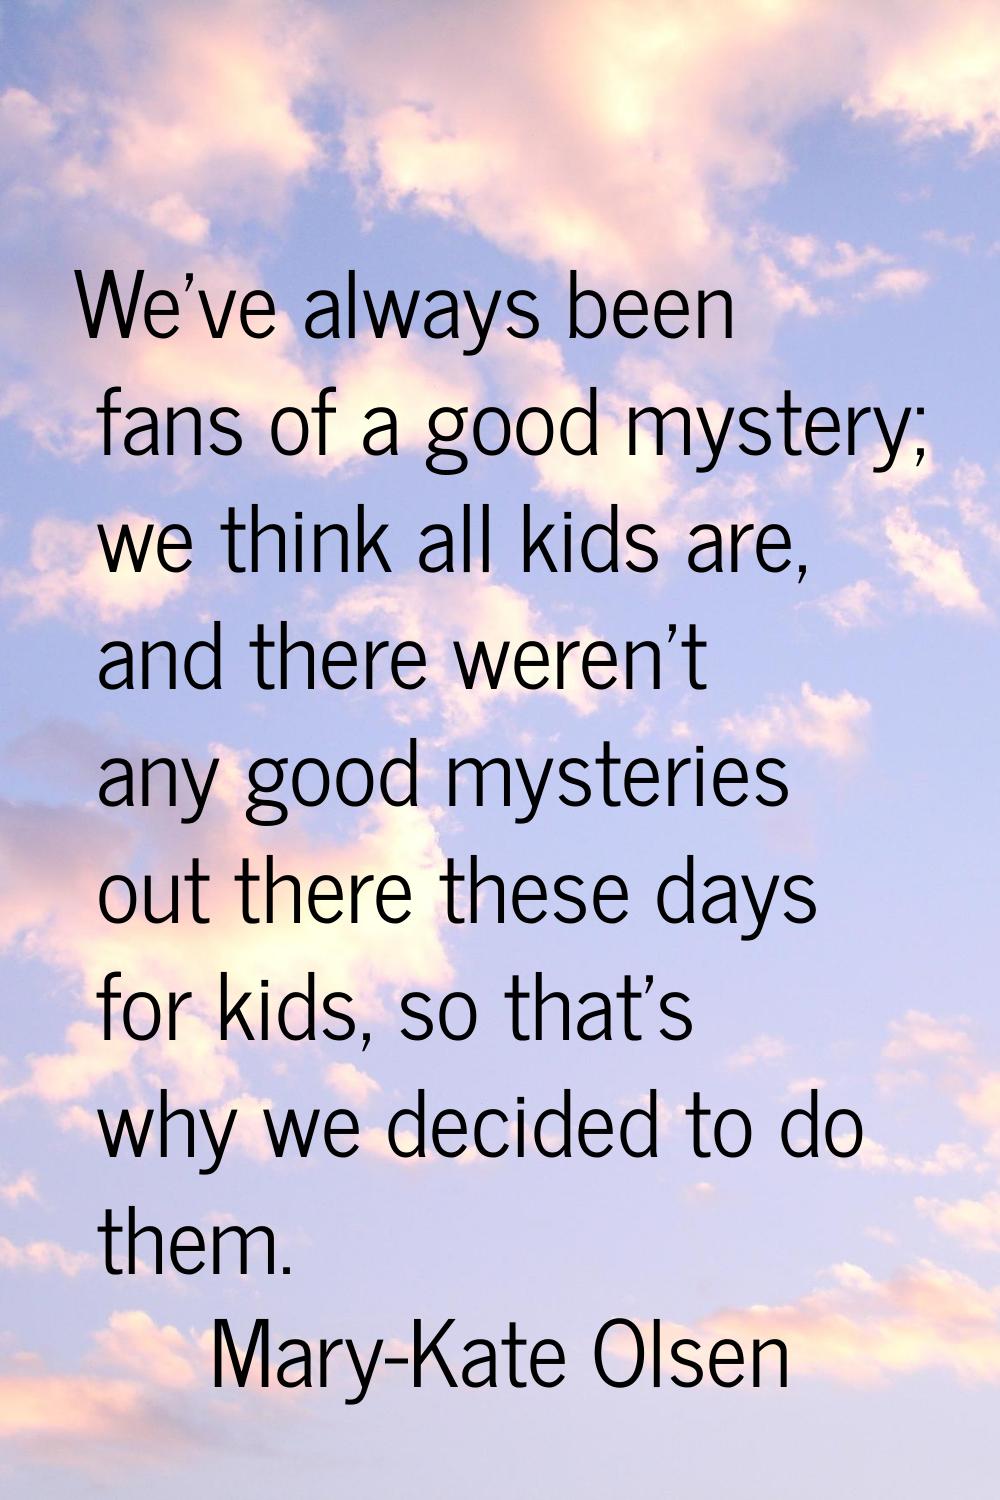 We've always been fans of a good mystery; we think all kids are, and there weren't any good mysteri